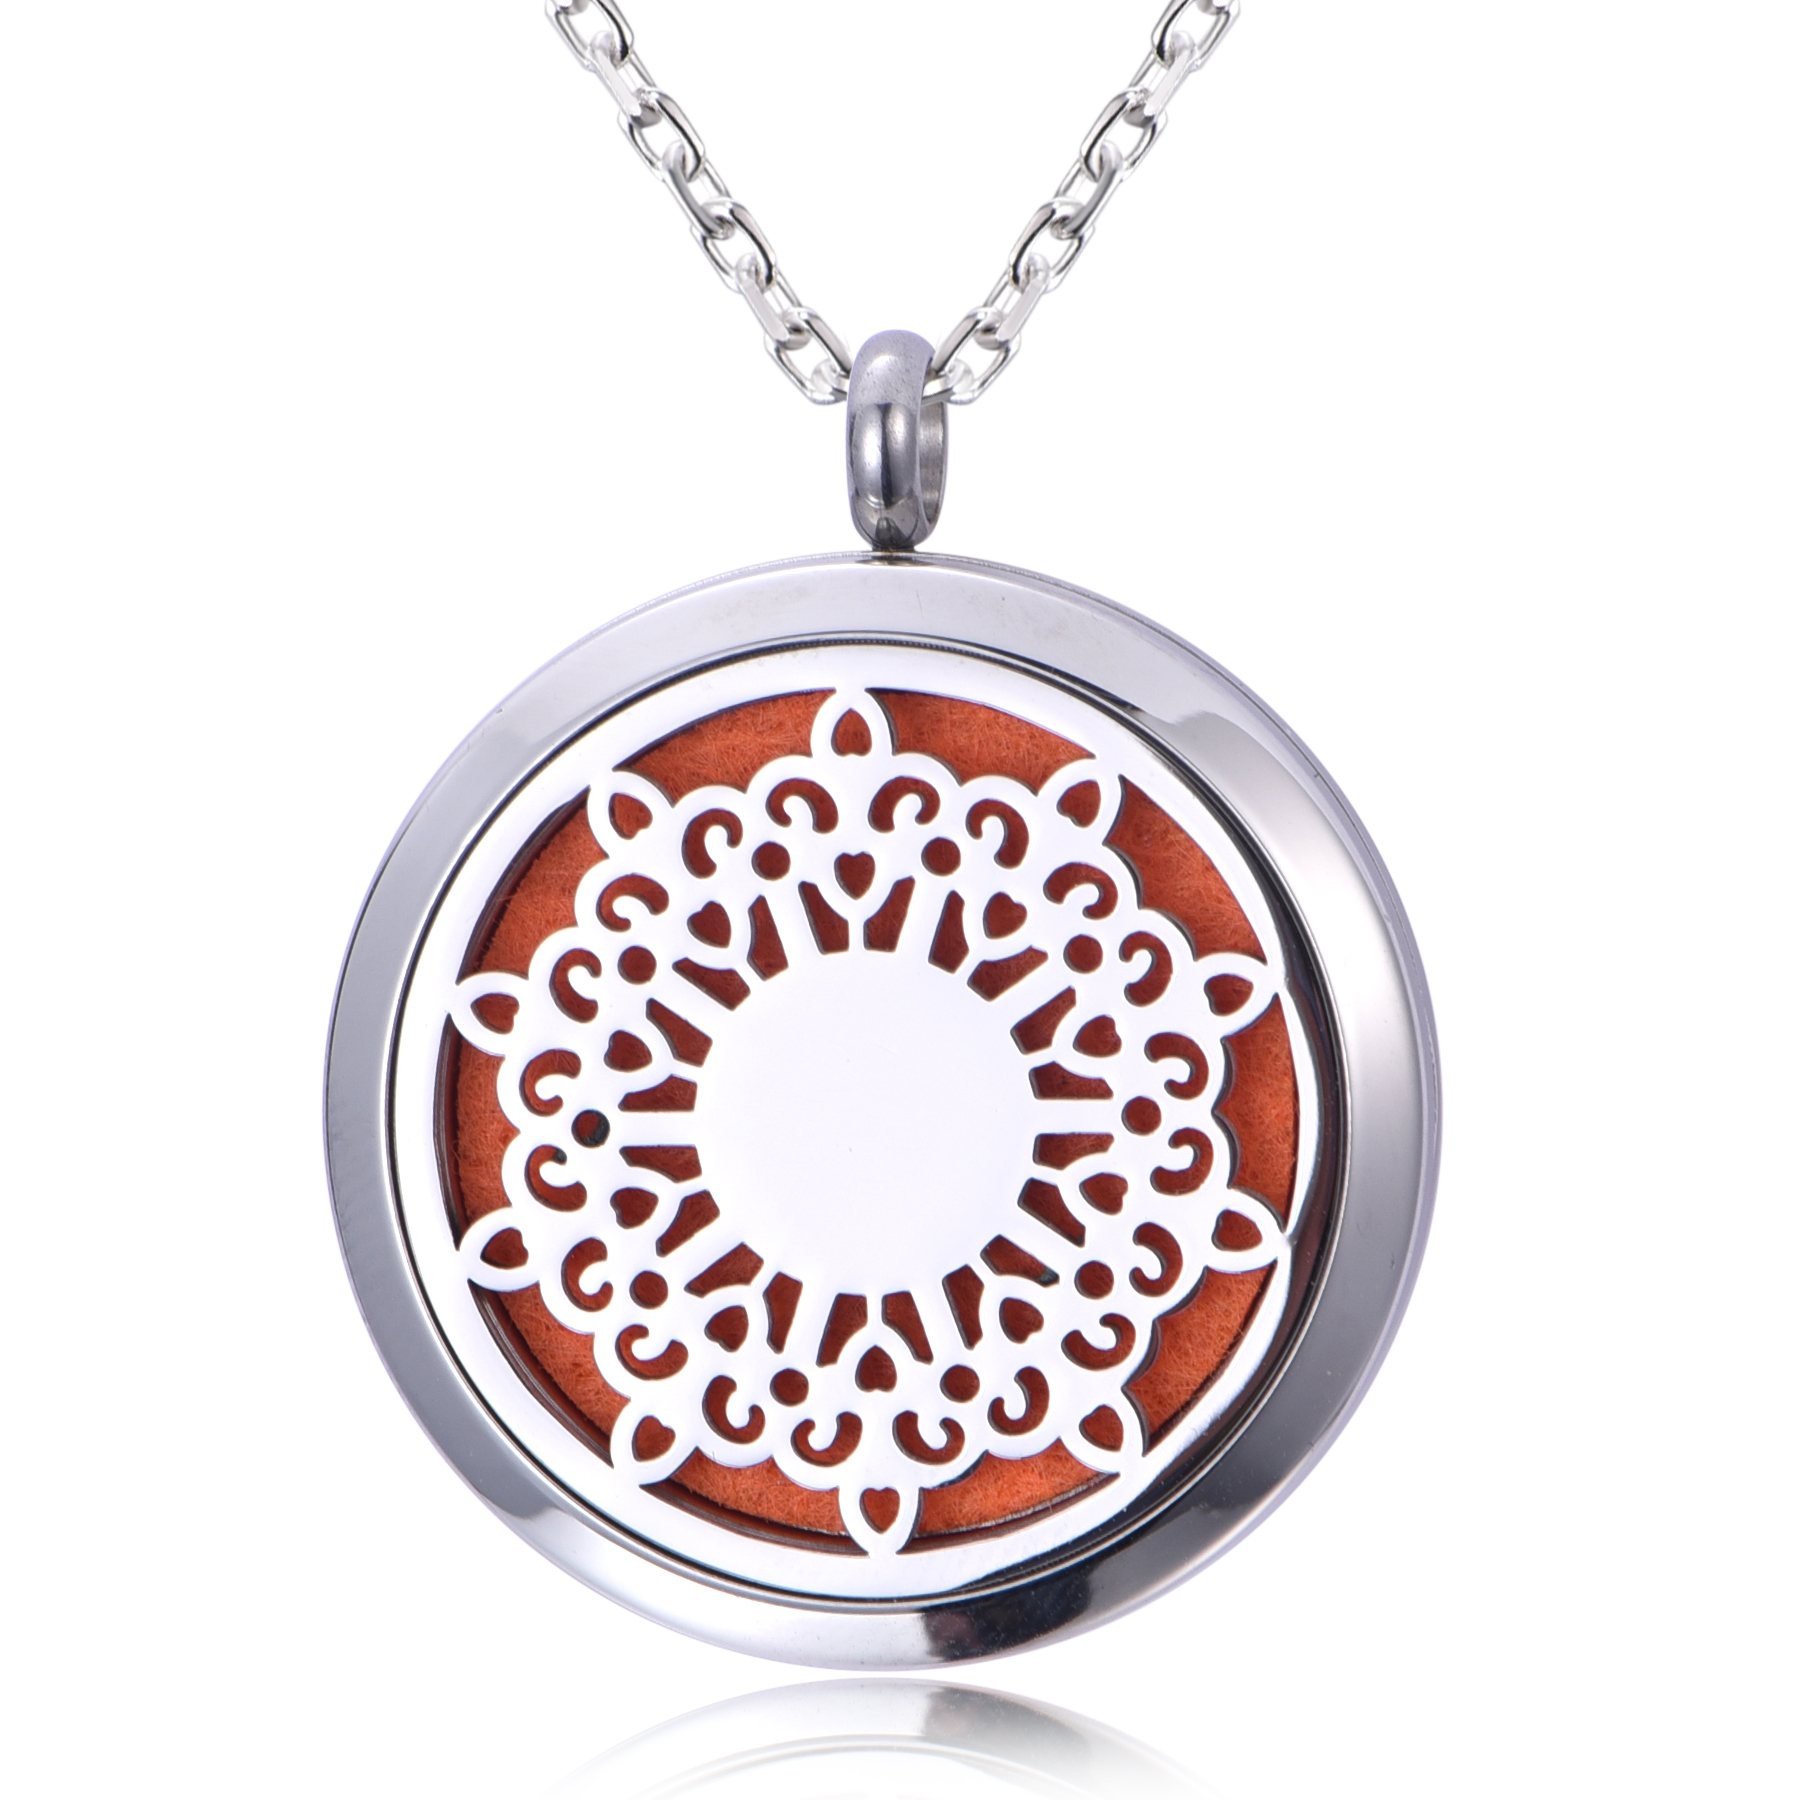 Unique Stainless Steel Dainty Hollow Round Shape Essential Oil Diffuse Locket Pendant Necklace NS10-11